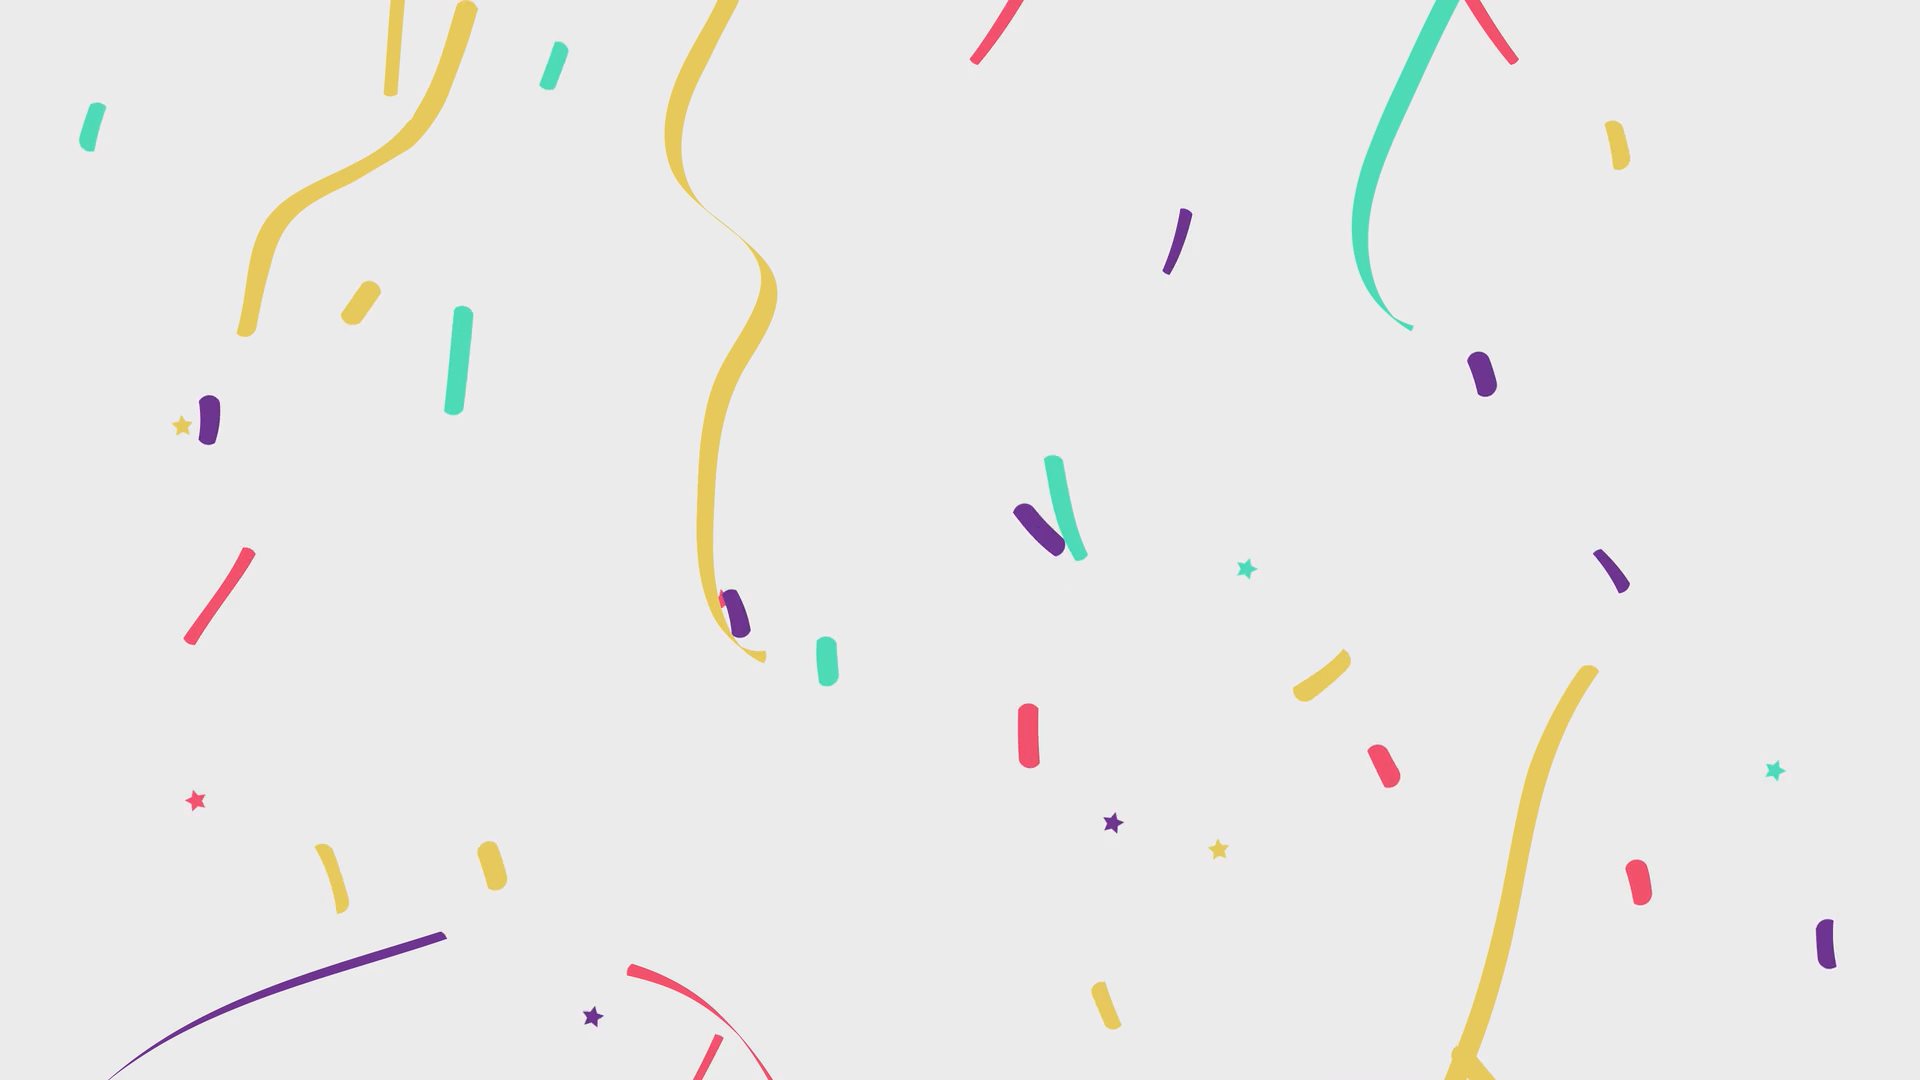 Video of flying colorful confetti on a white background